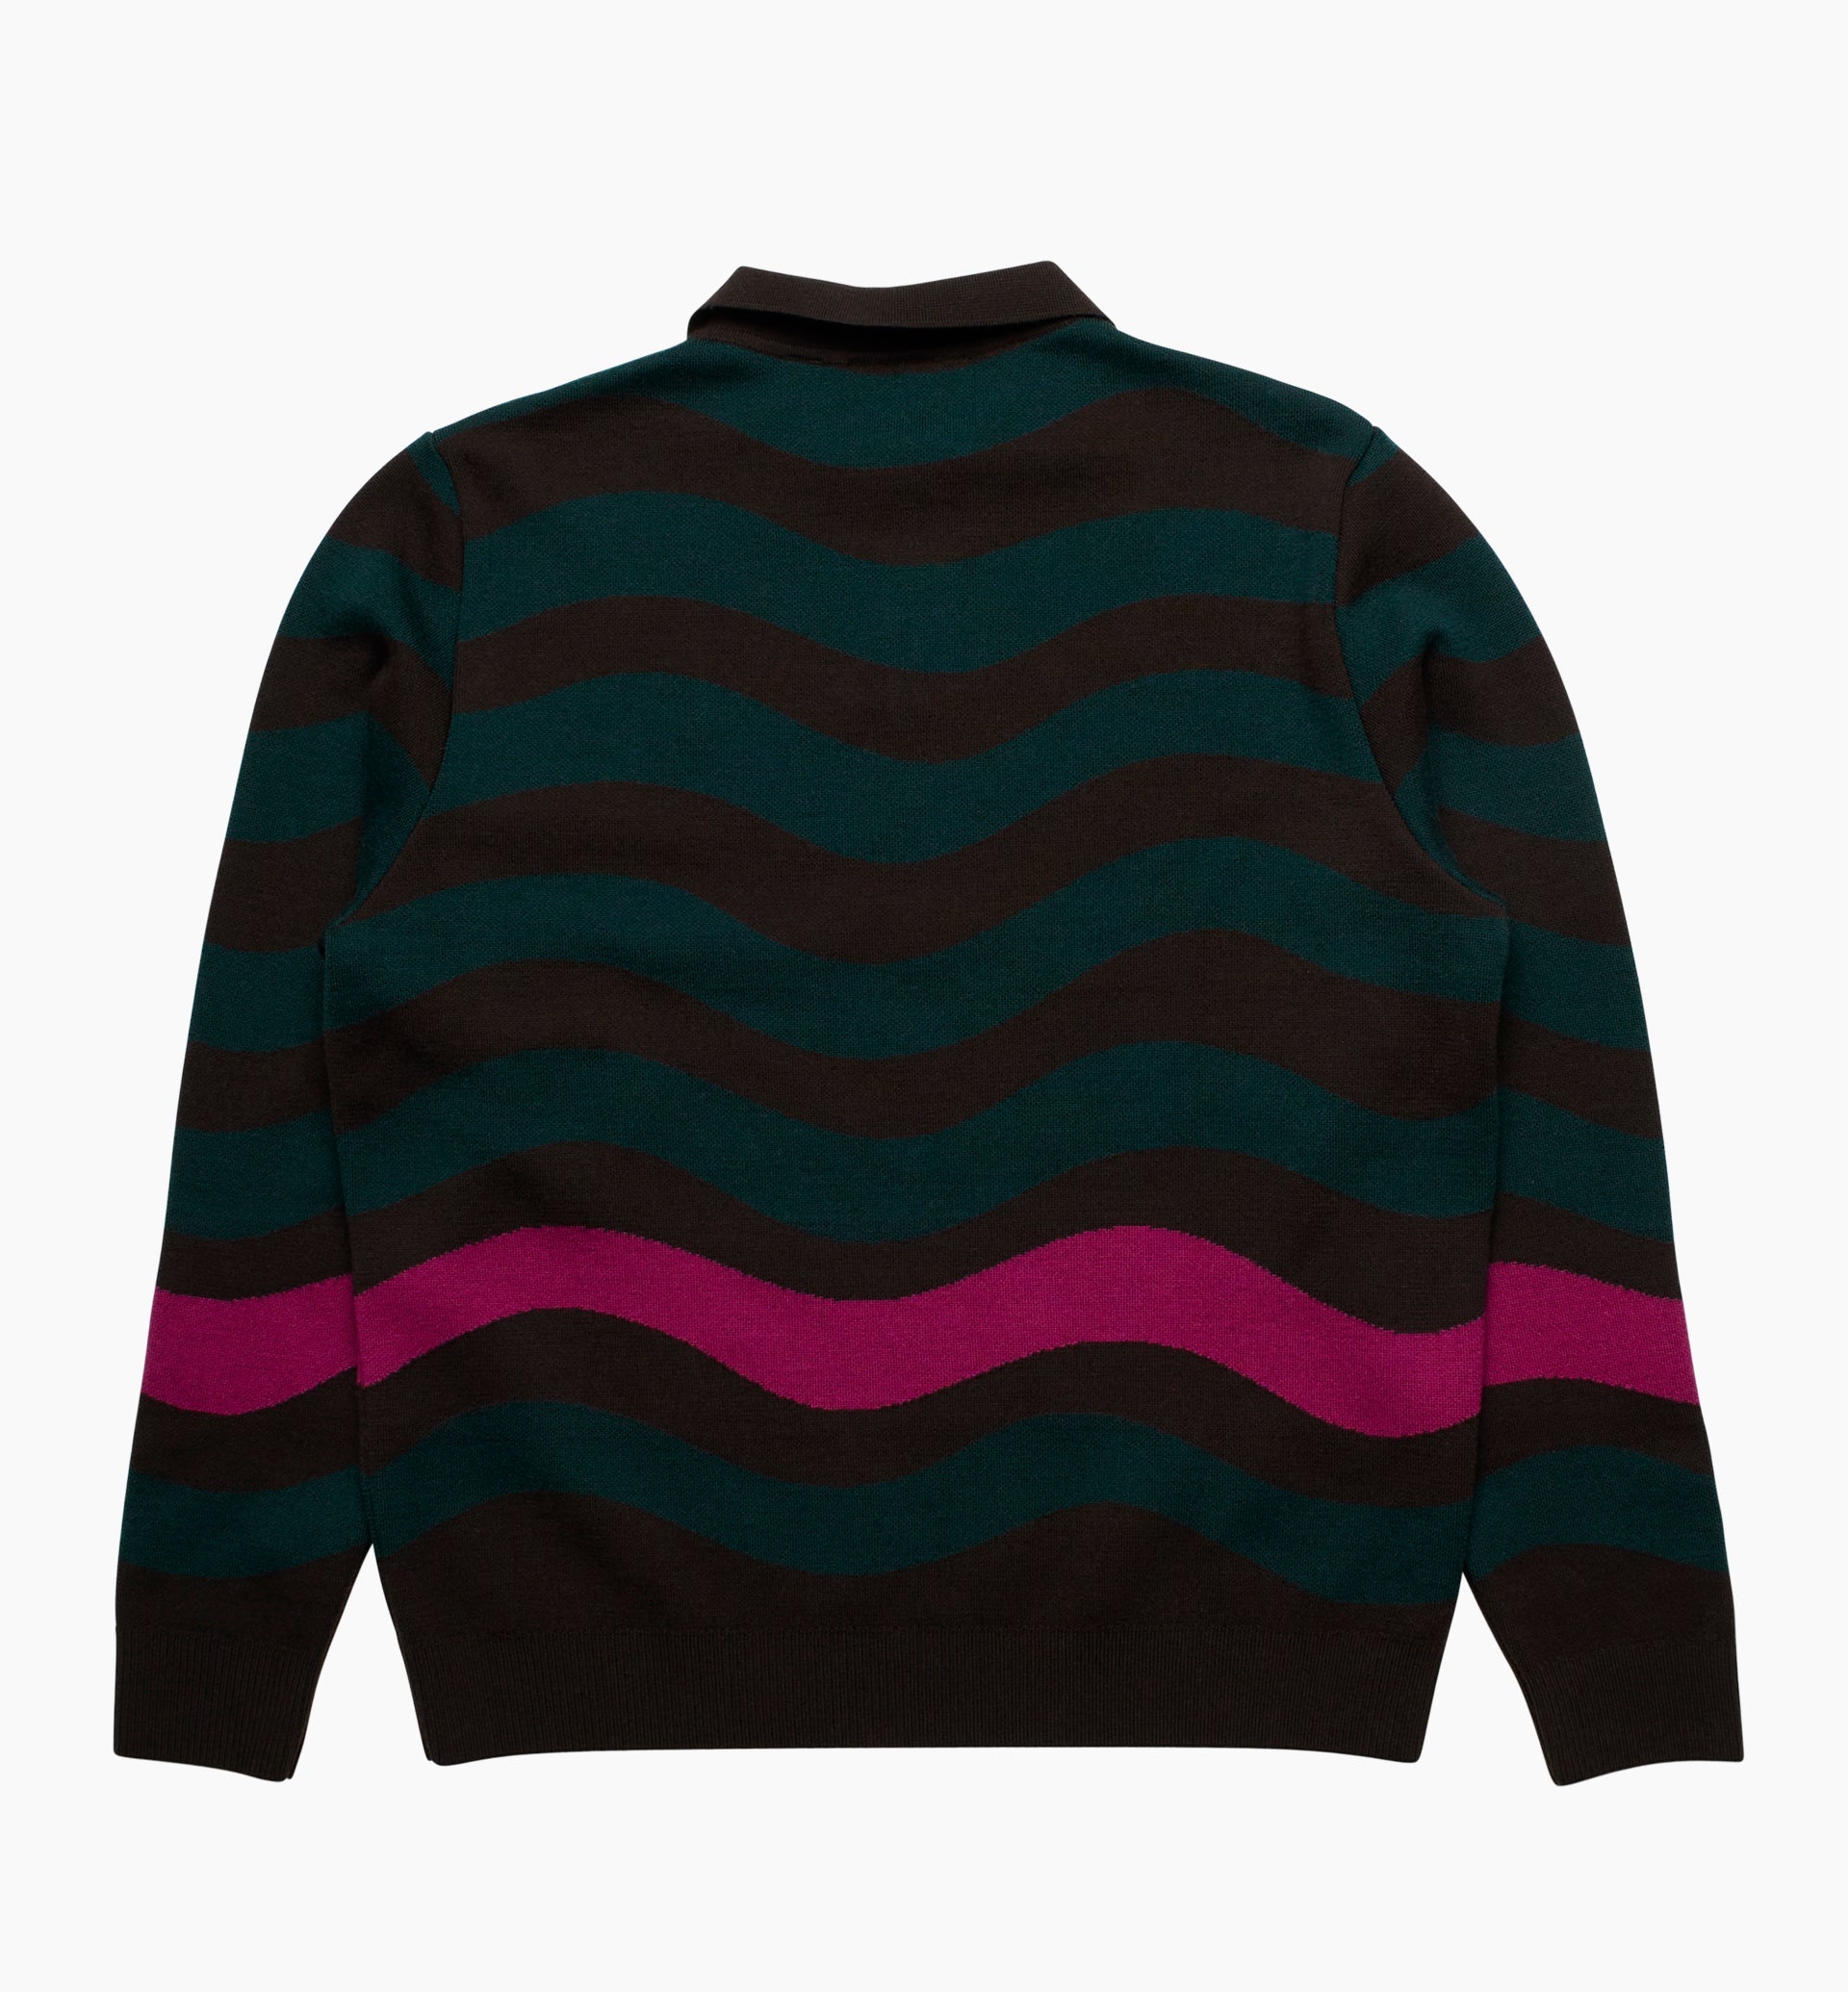 Parra - one weird wave knitted pullover